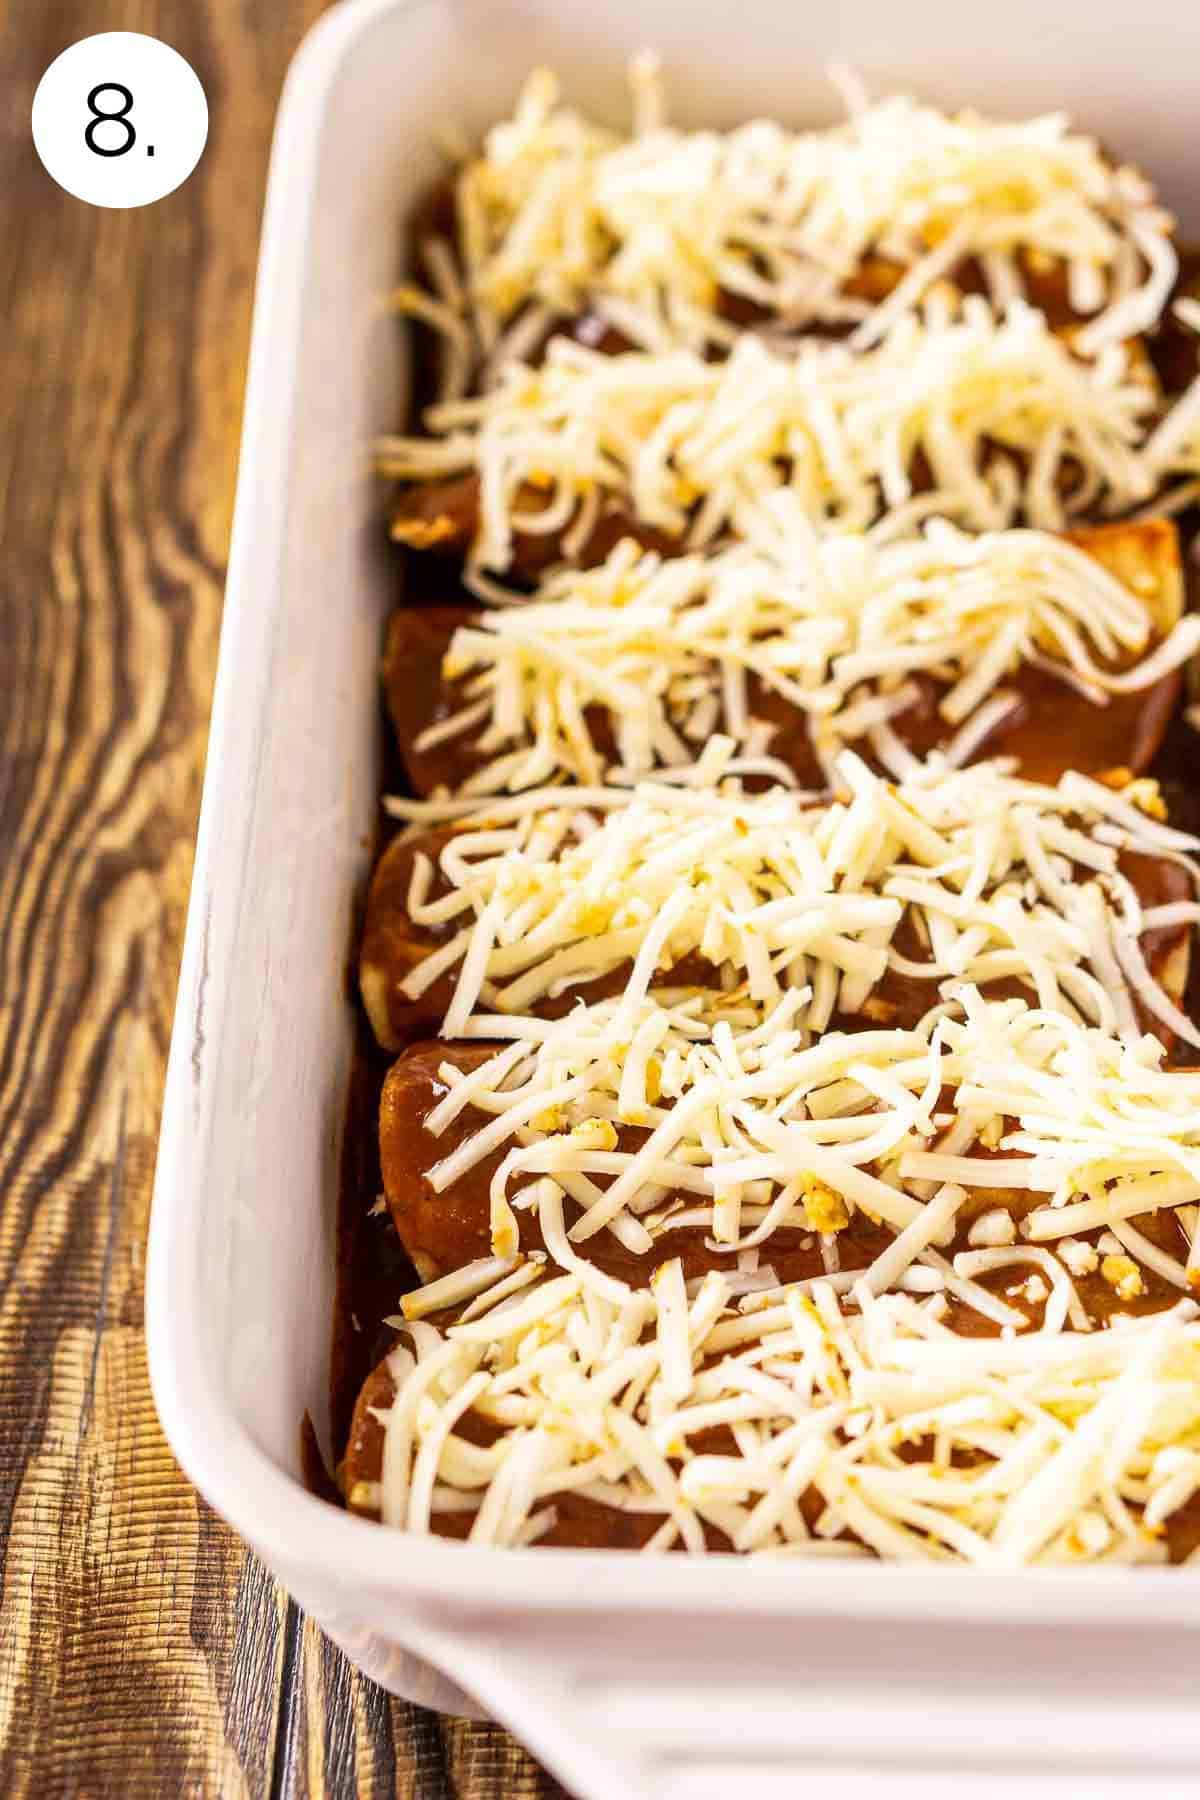 The enchiladas in a white baking dish on a brown wooden surface covered in the sauce and cheese before baking.